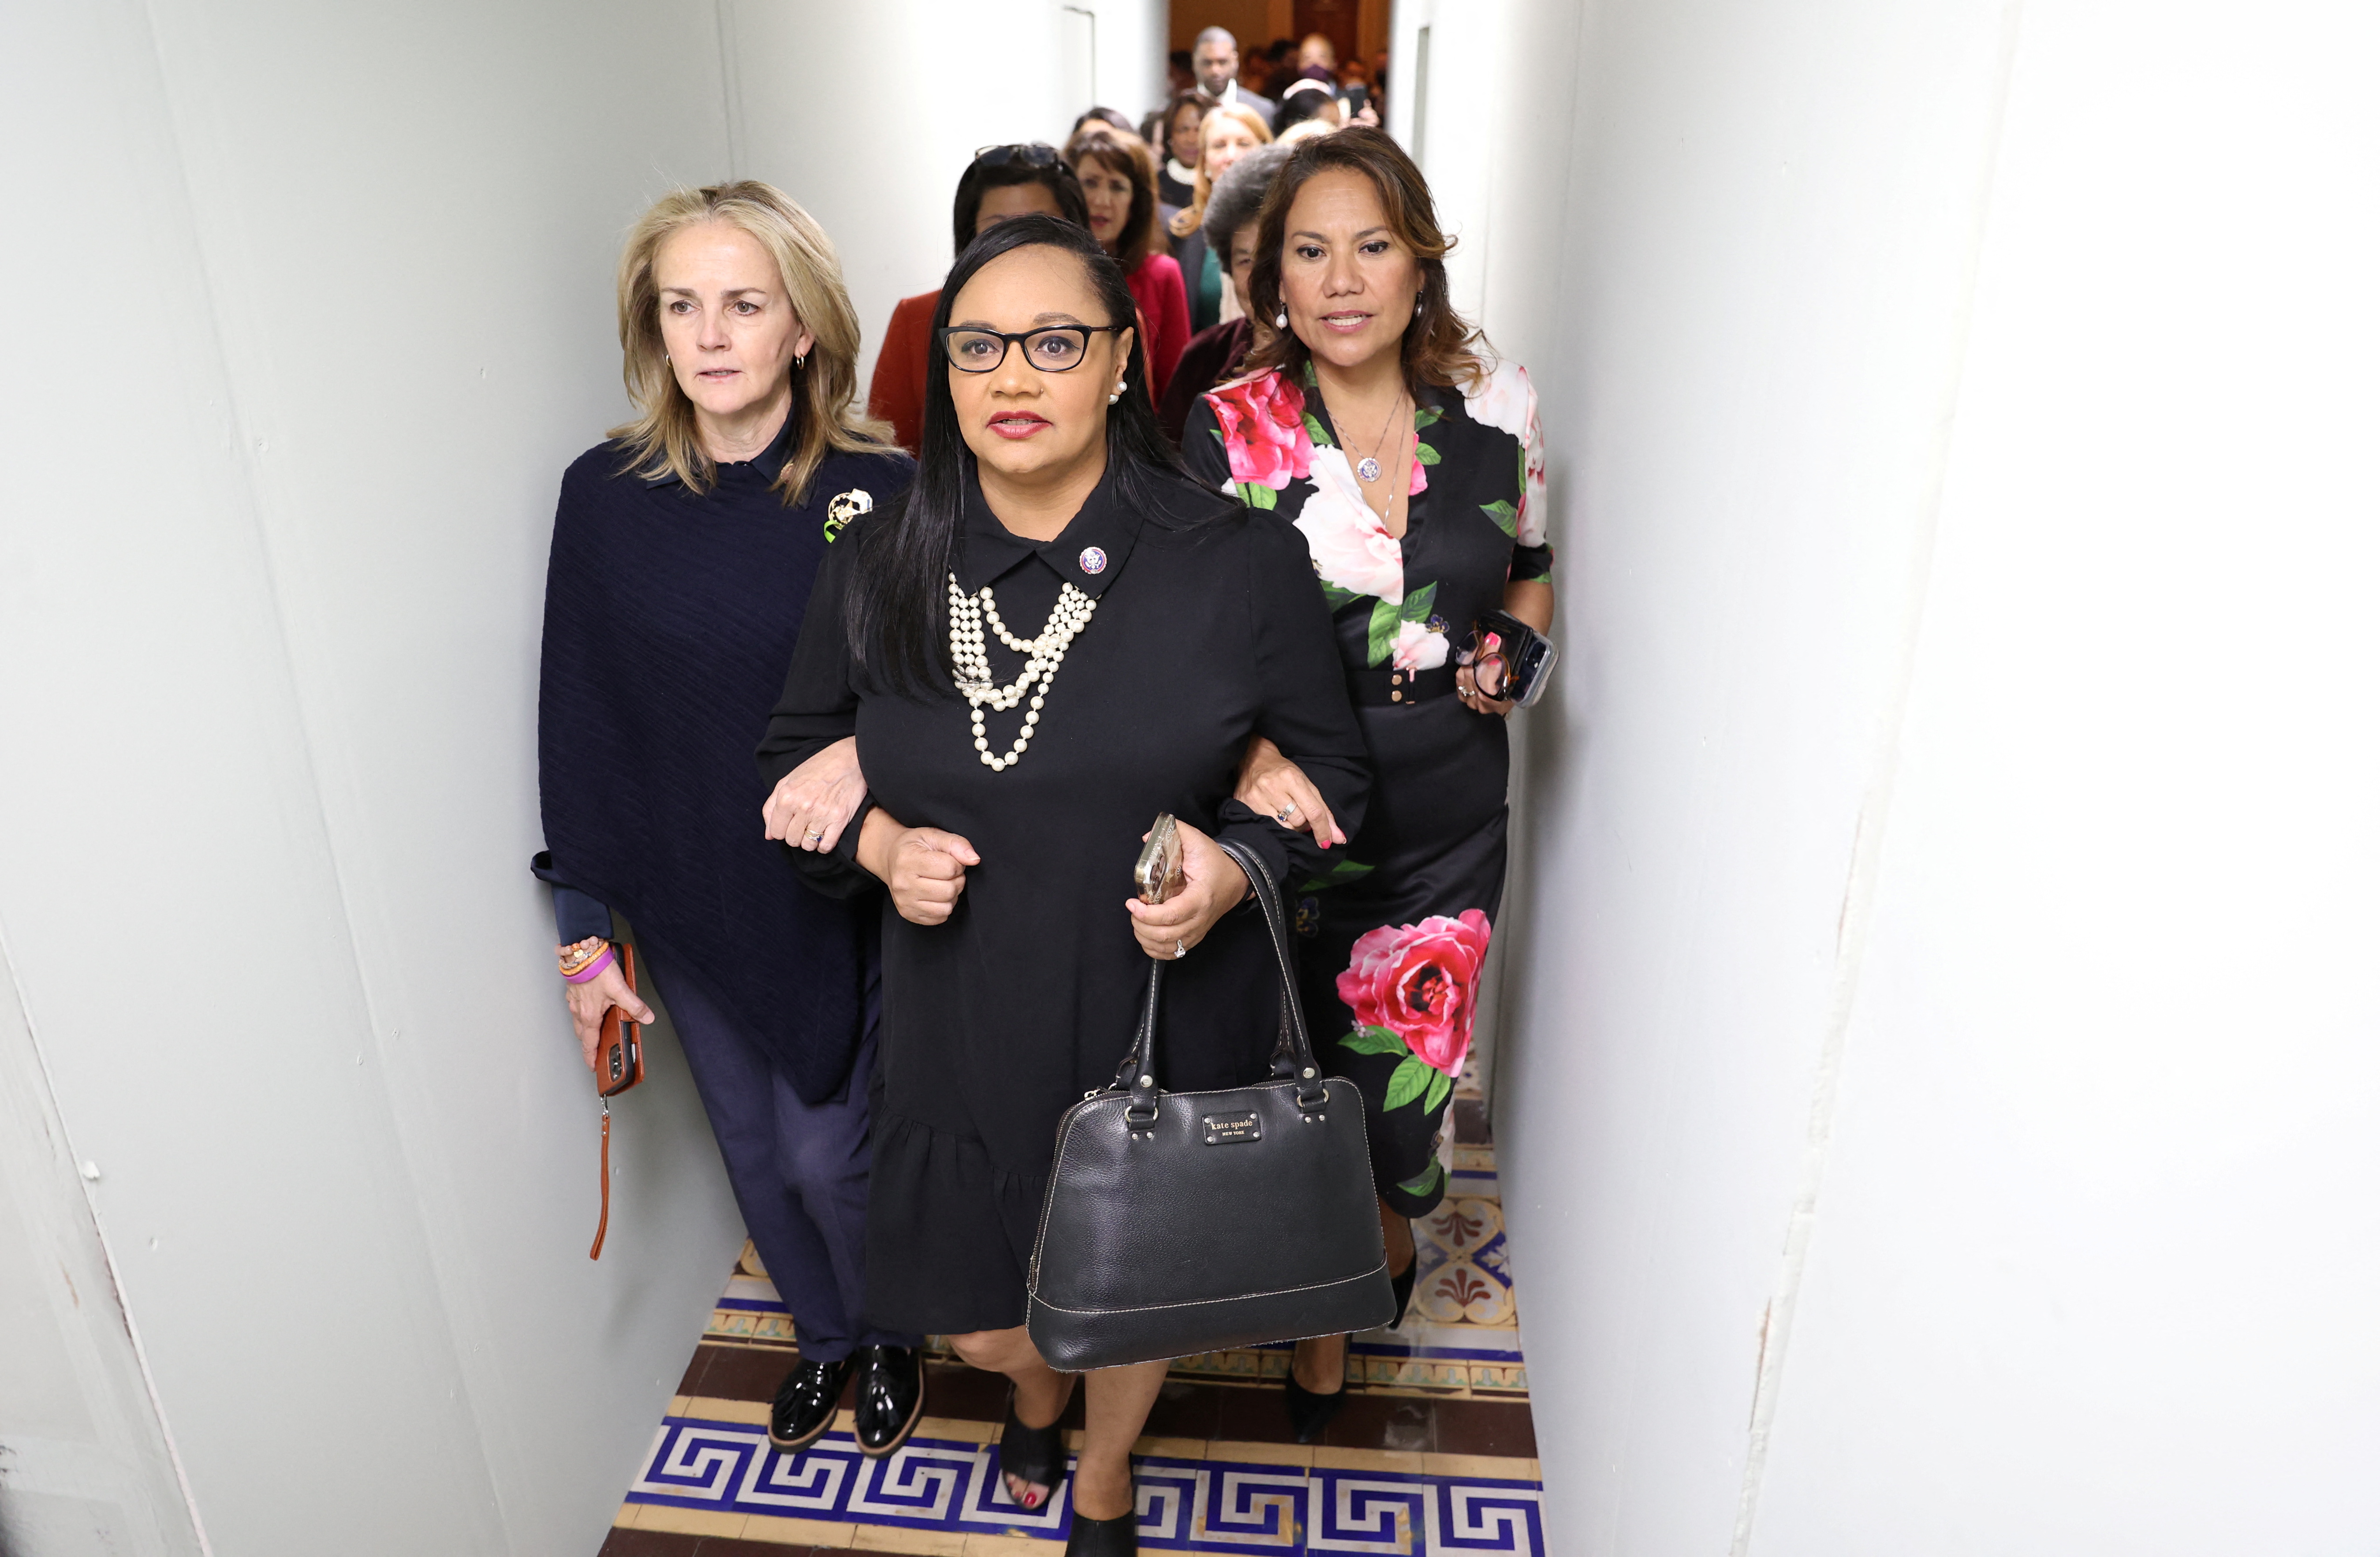 Democratic women members of the U.S. House of Representatives lead protest for abortion rights outside Senate Chamber at Capitol in Washington